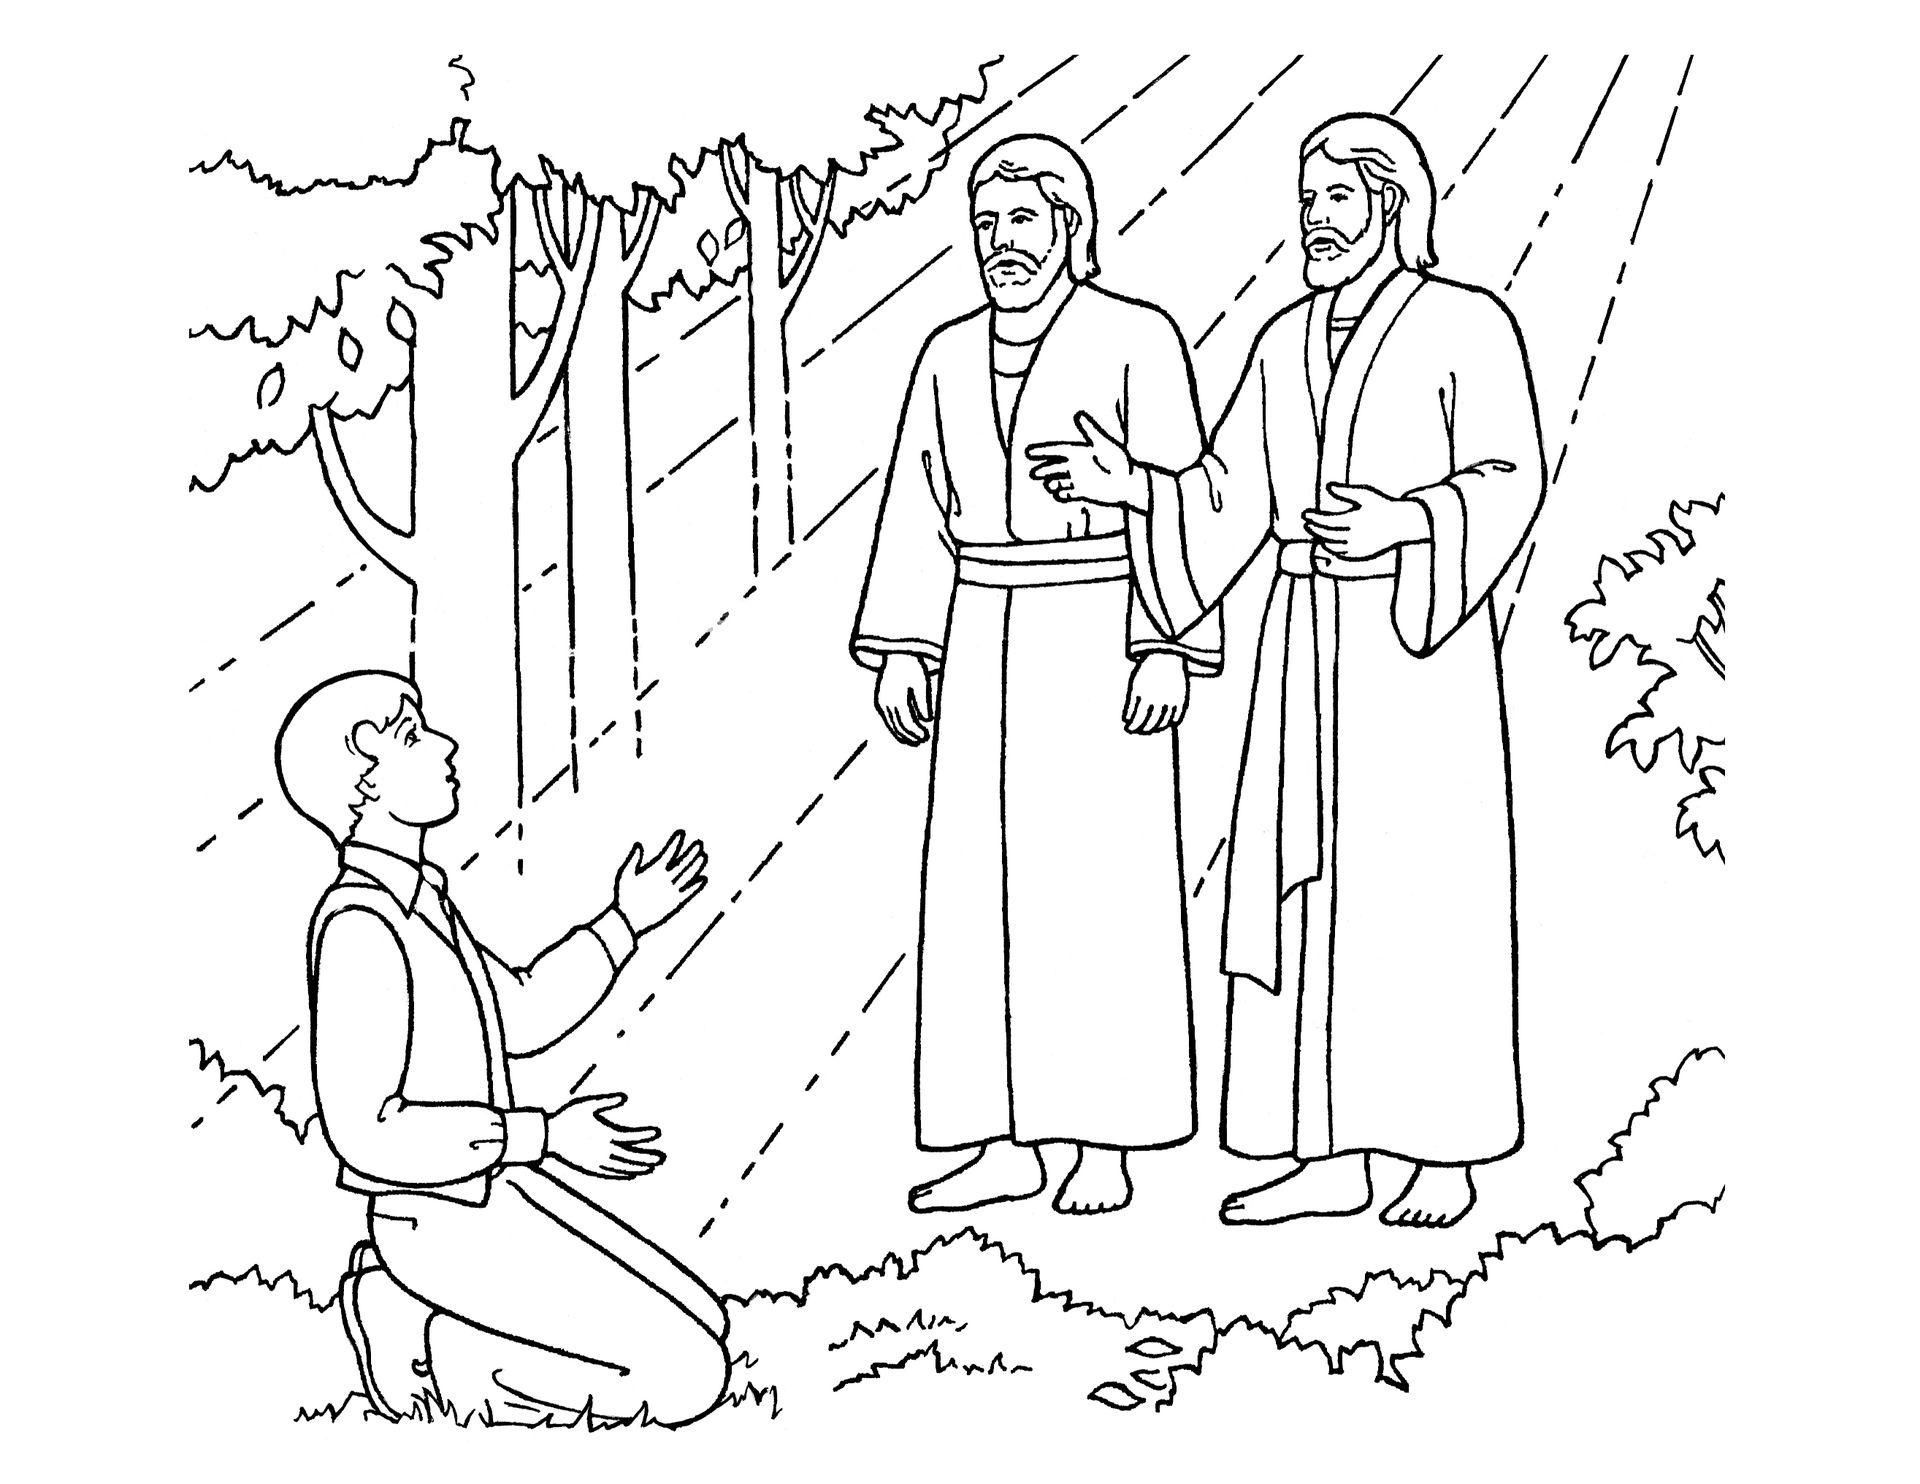 An illustration of Joseph Smith seeing Heavenly Father and Jesus Christ, from the nursery manual Behold Your Little Ones (2008), page 91.